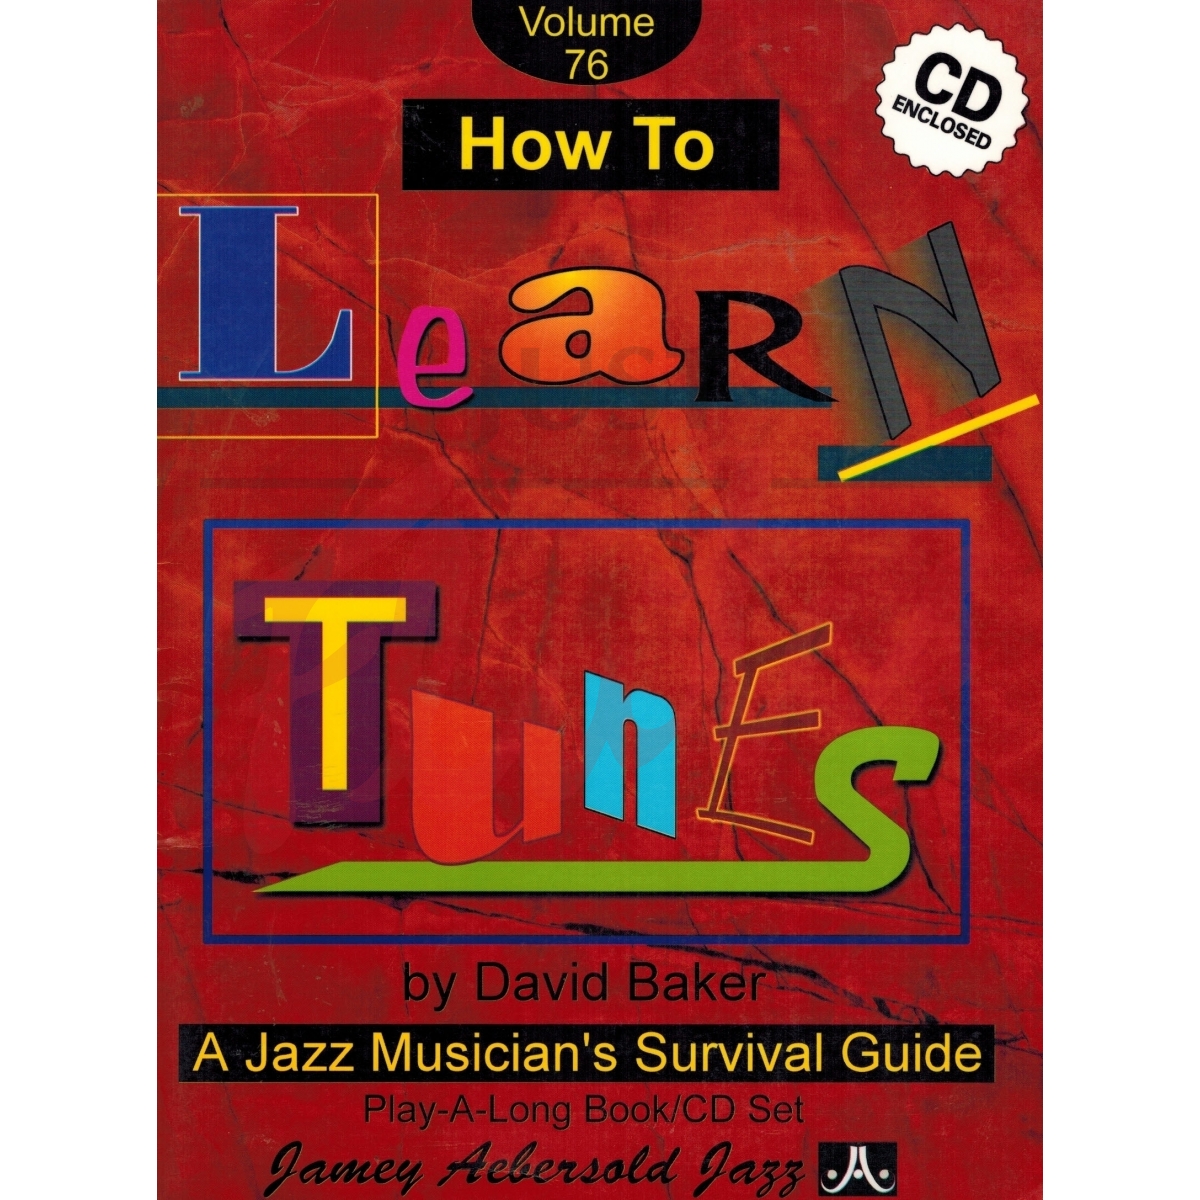 How To Learn Tunes - A Jazz Musician's Survival Guide